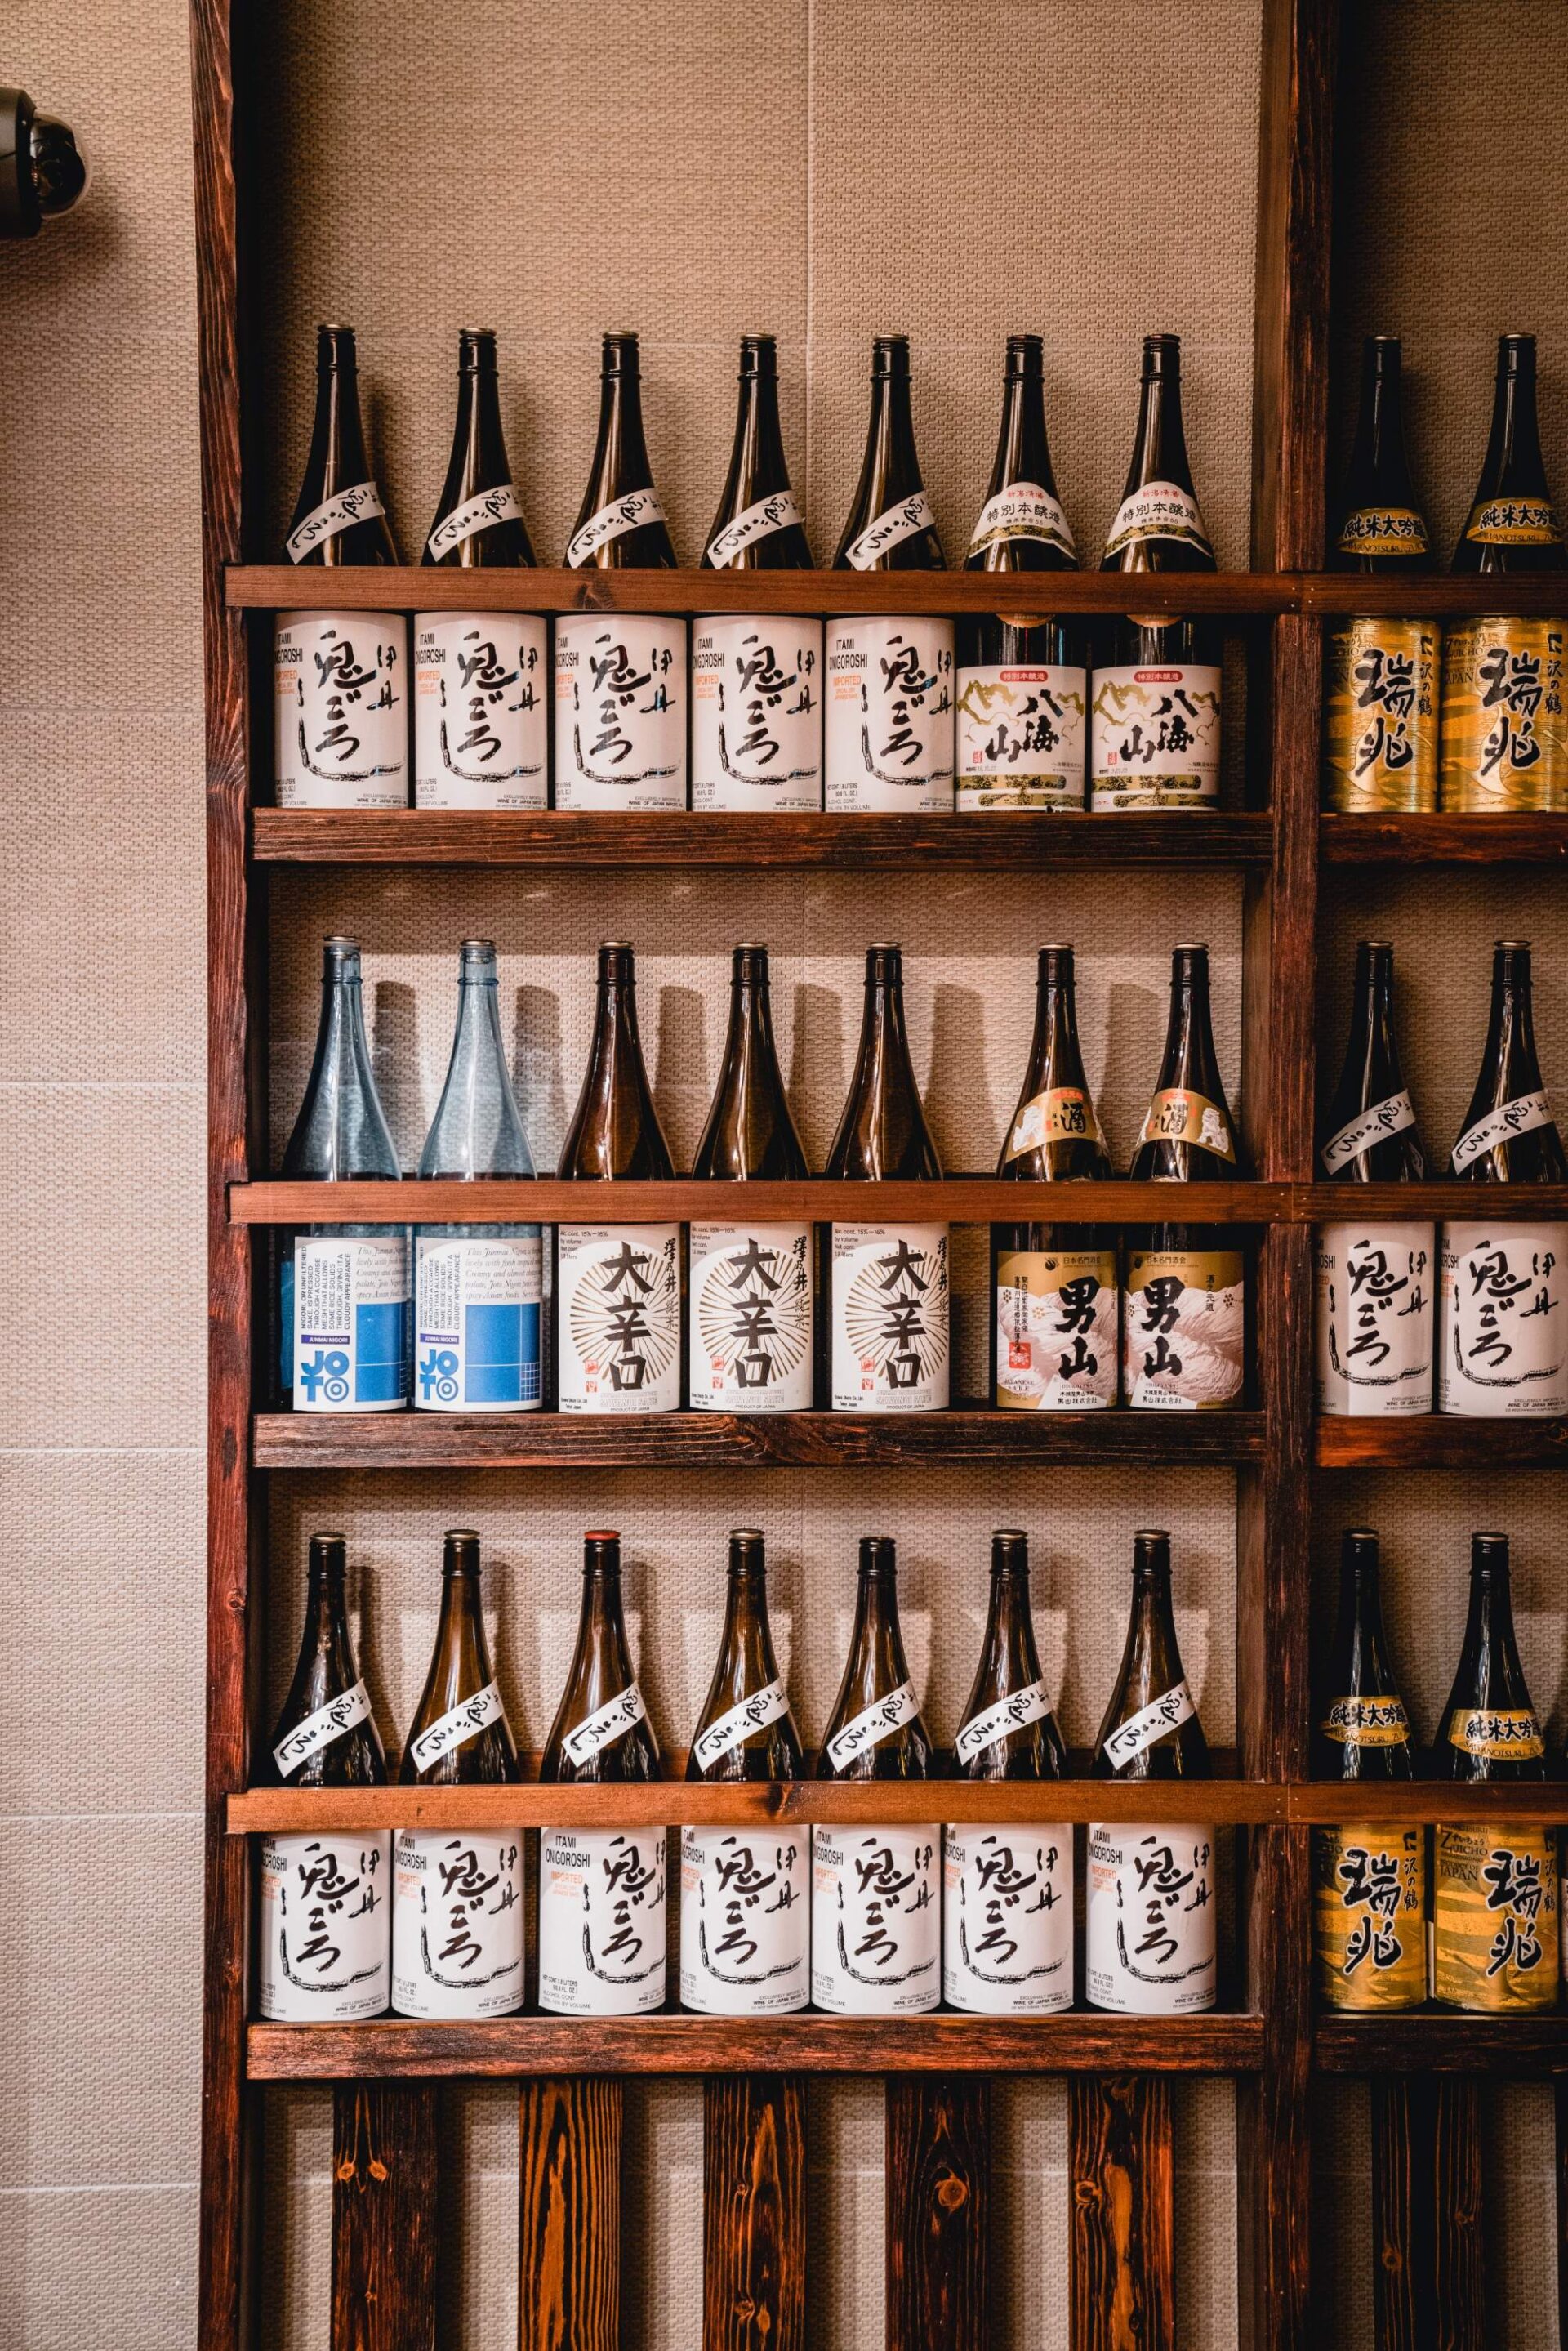 There is a wall of sake.